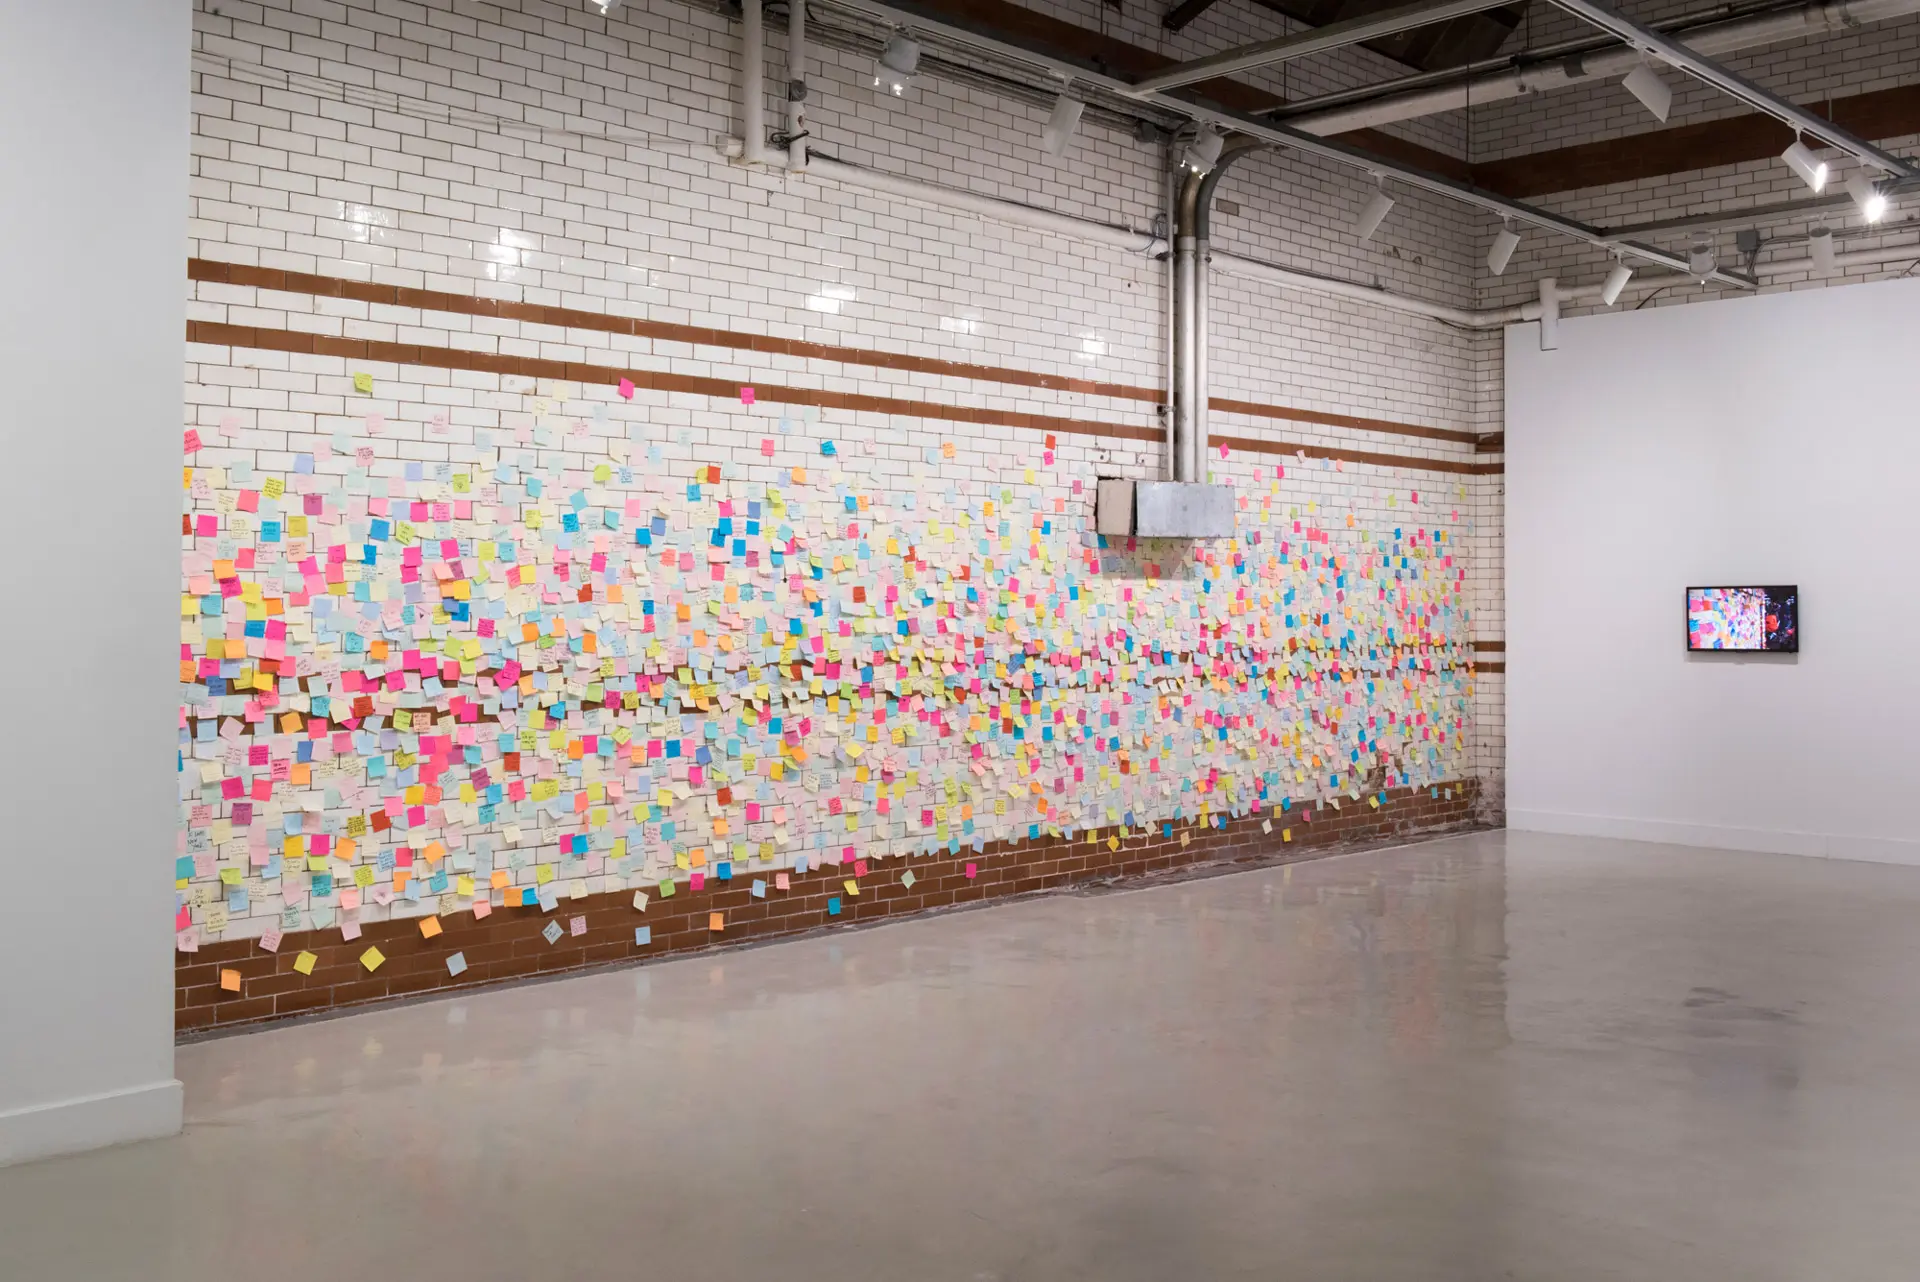 installation view of Subway Therapy: a project by Matthew "Levee" Chavez